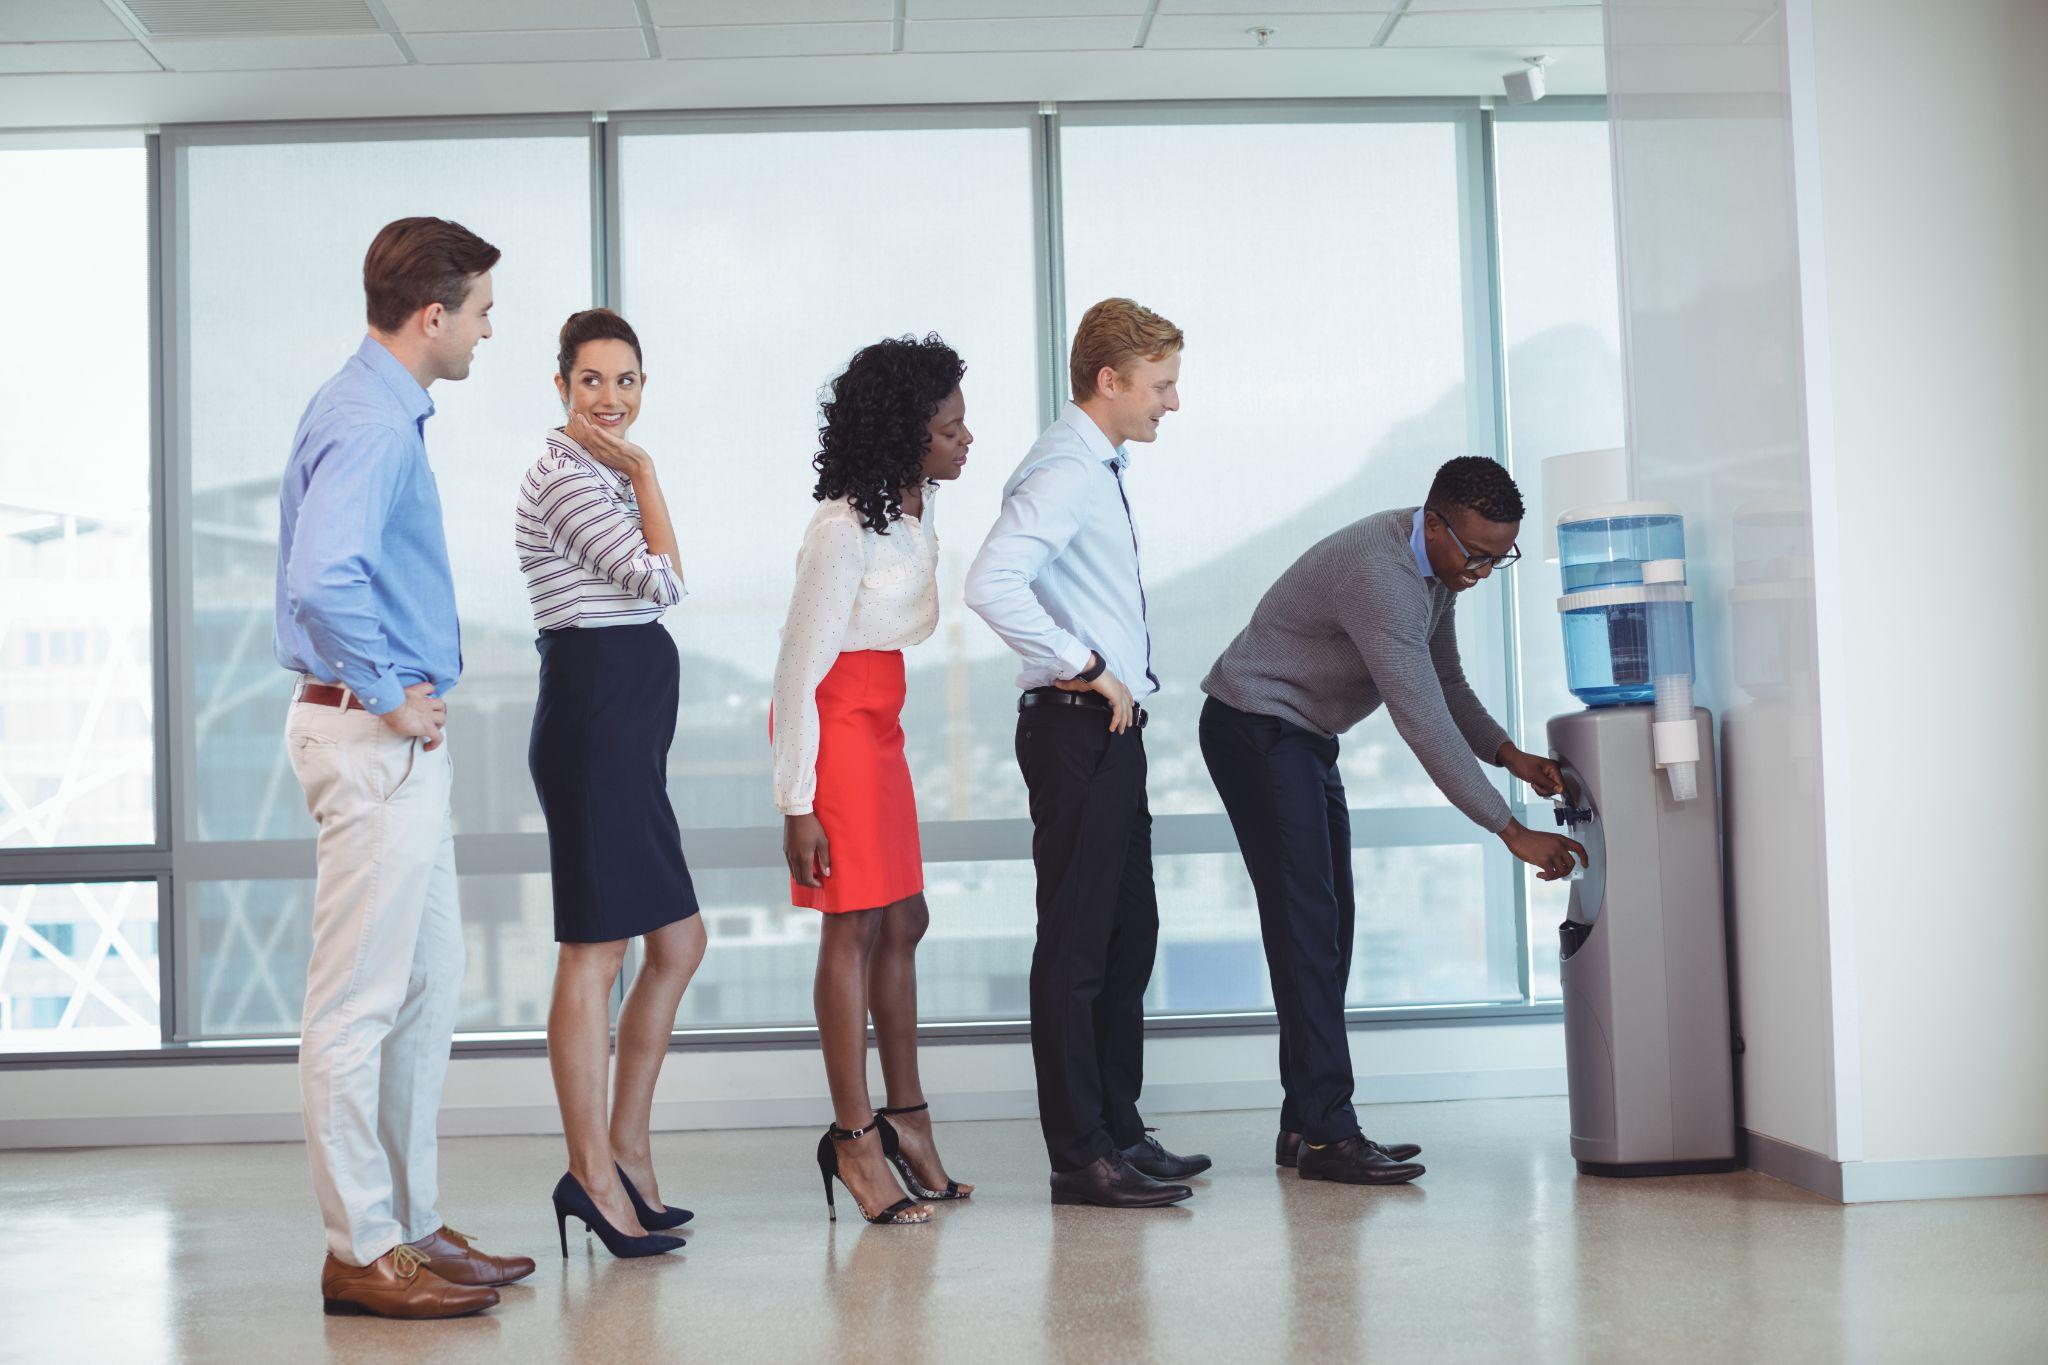 Office employees using a water cooler